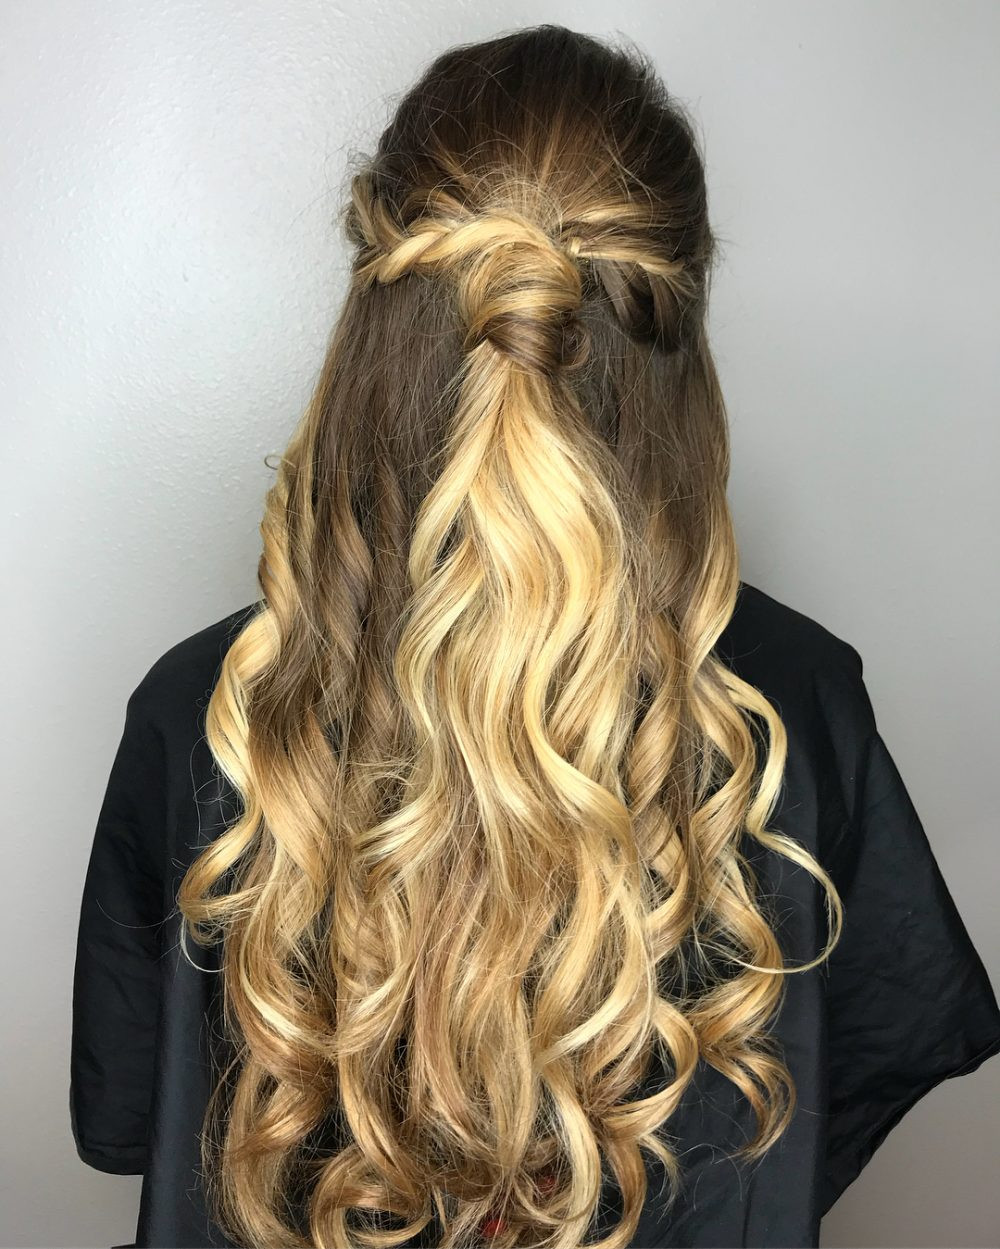 Long Hairstyles For Homecoming
 29 Prom Hairstyles for Long Hair That Are Gorgeous